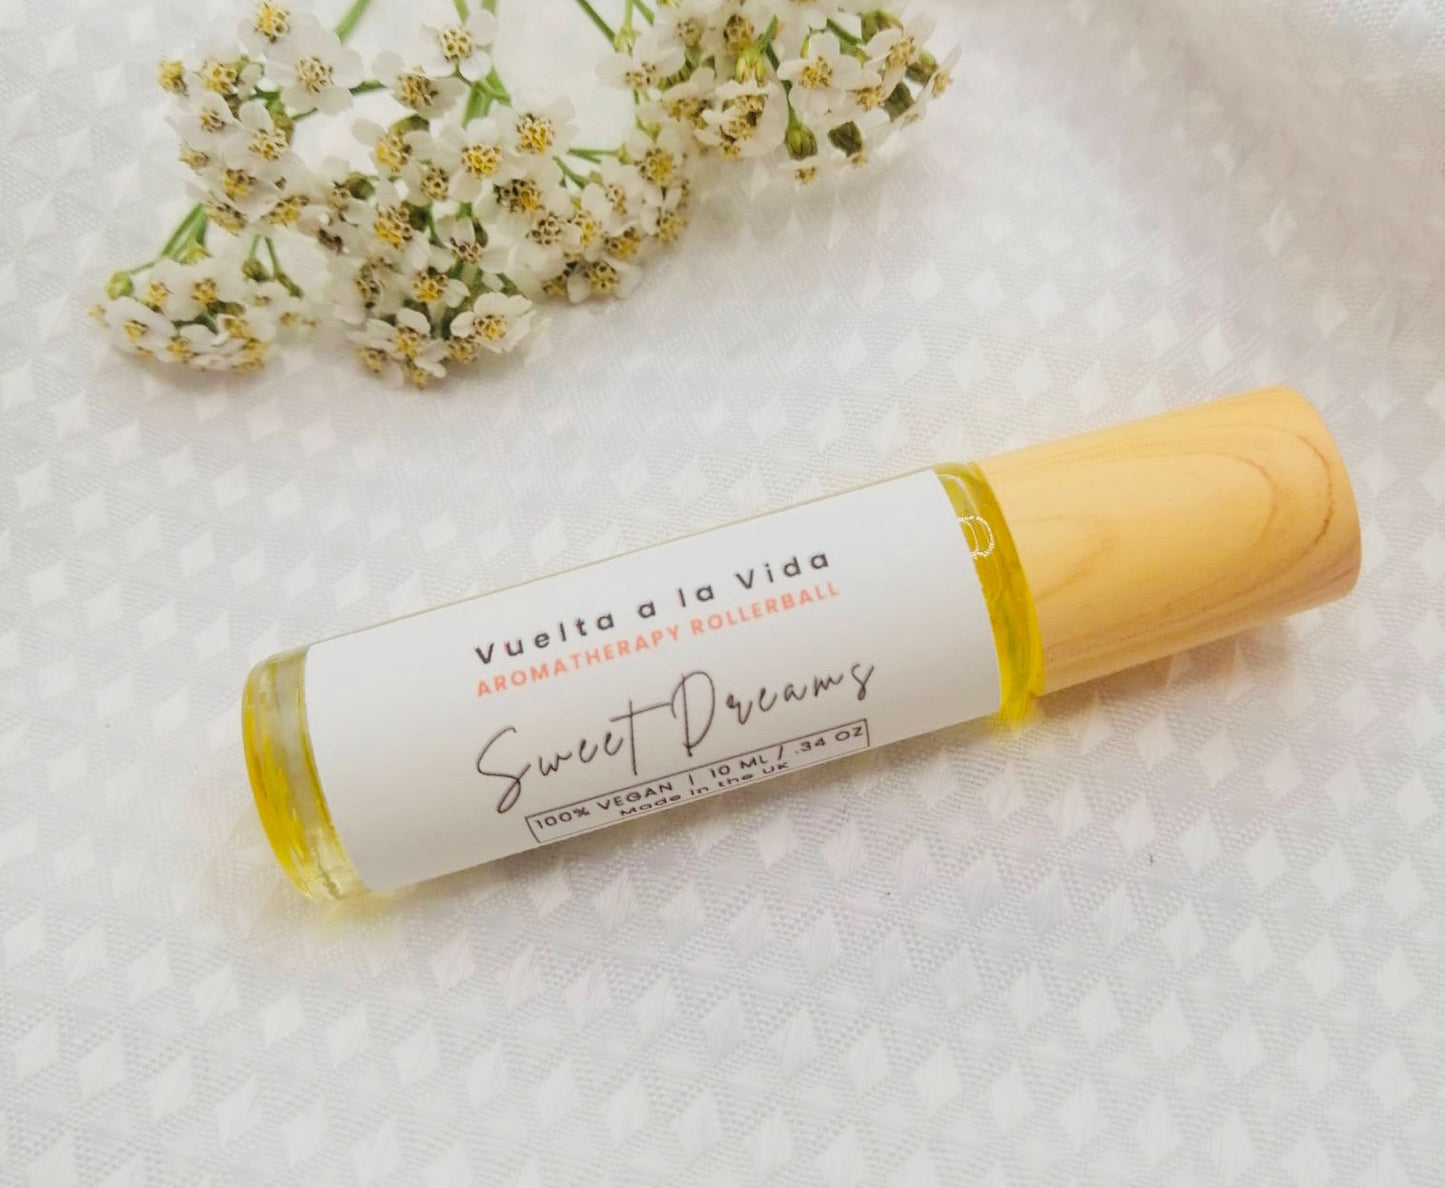 SWEET DREAMS Aromatherapy Roller Ball 10ml